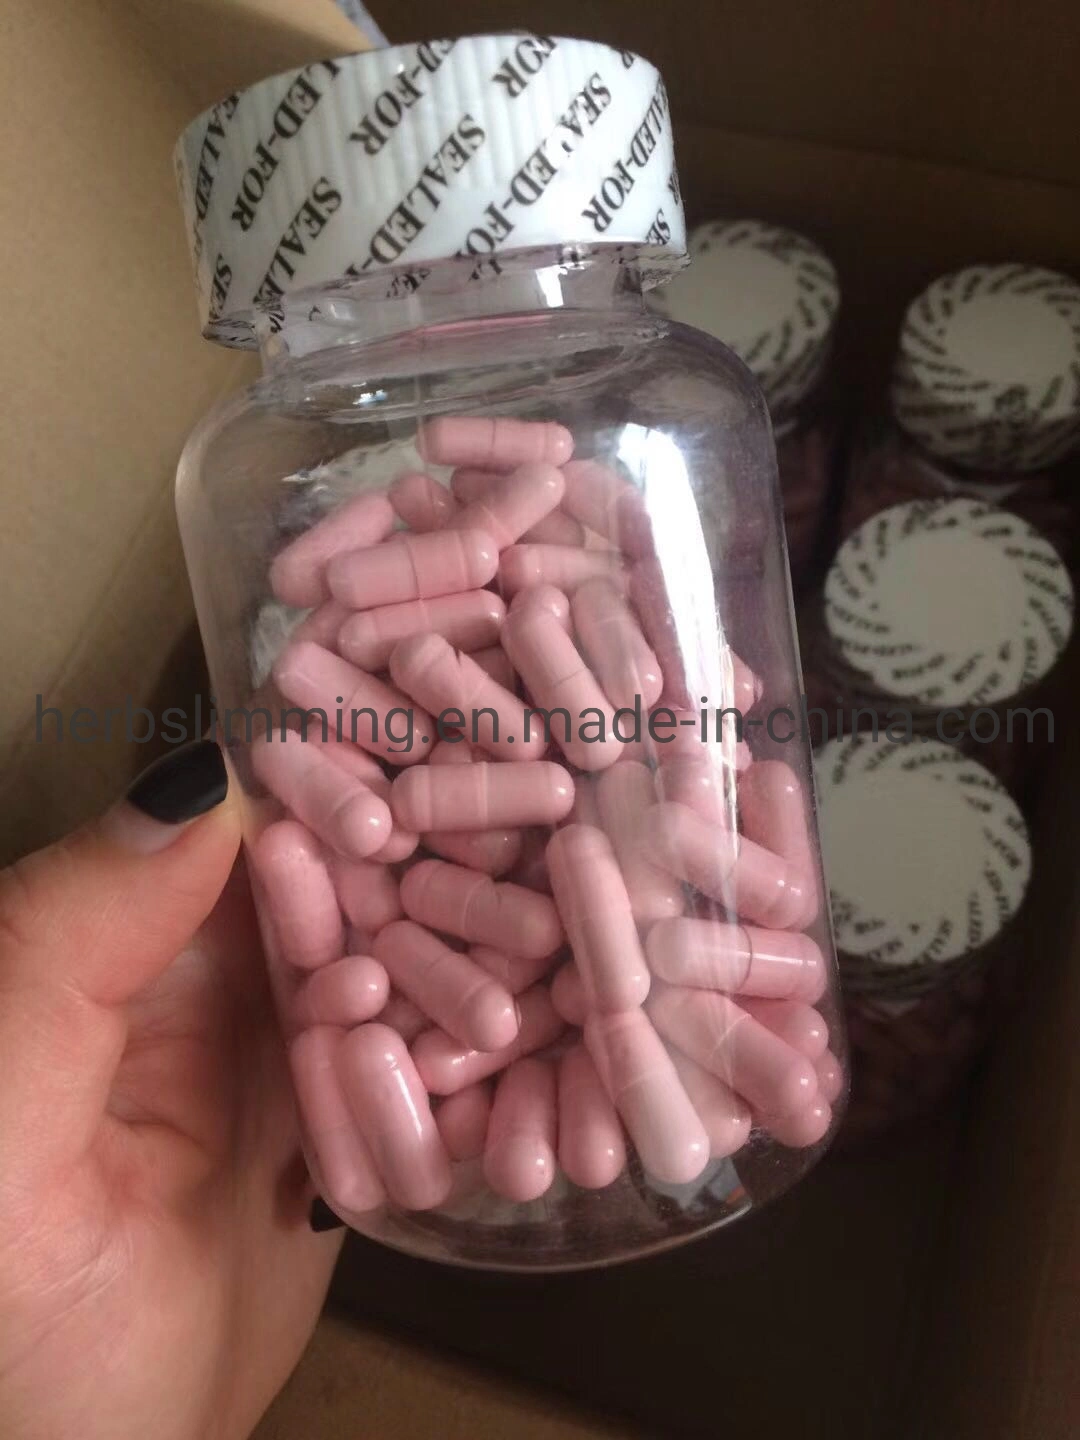 Strong Quality Capsules Glutathione Skin Whitening Pills